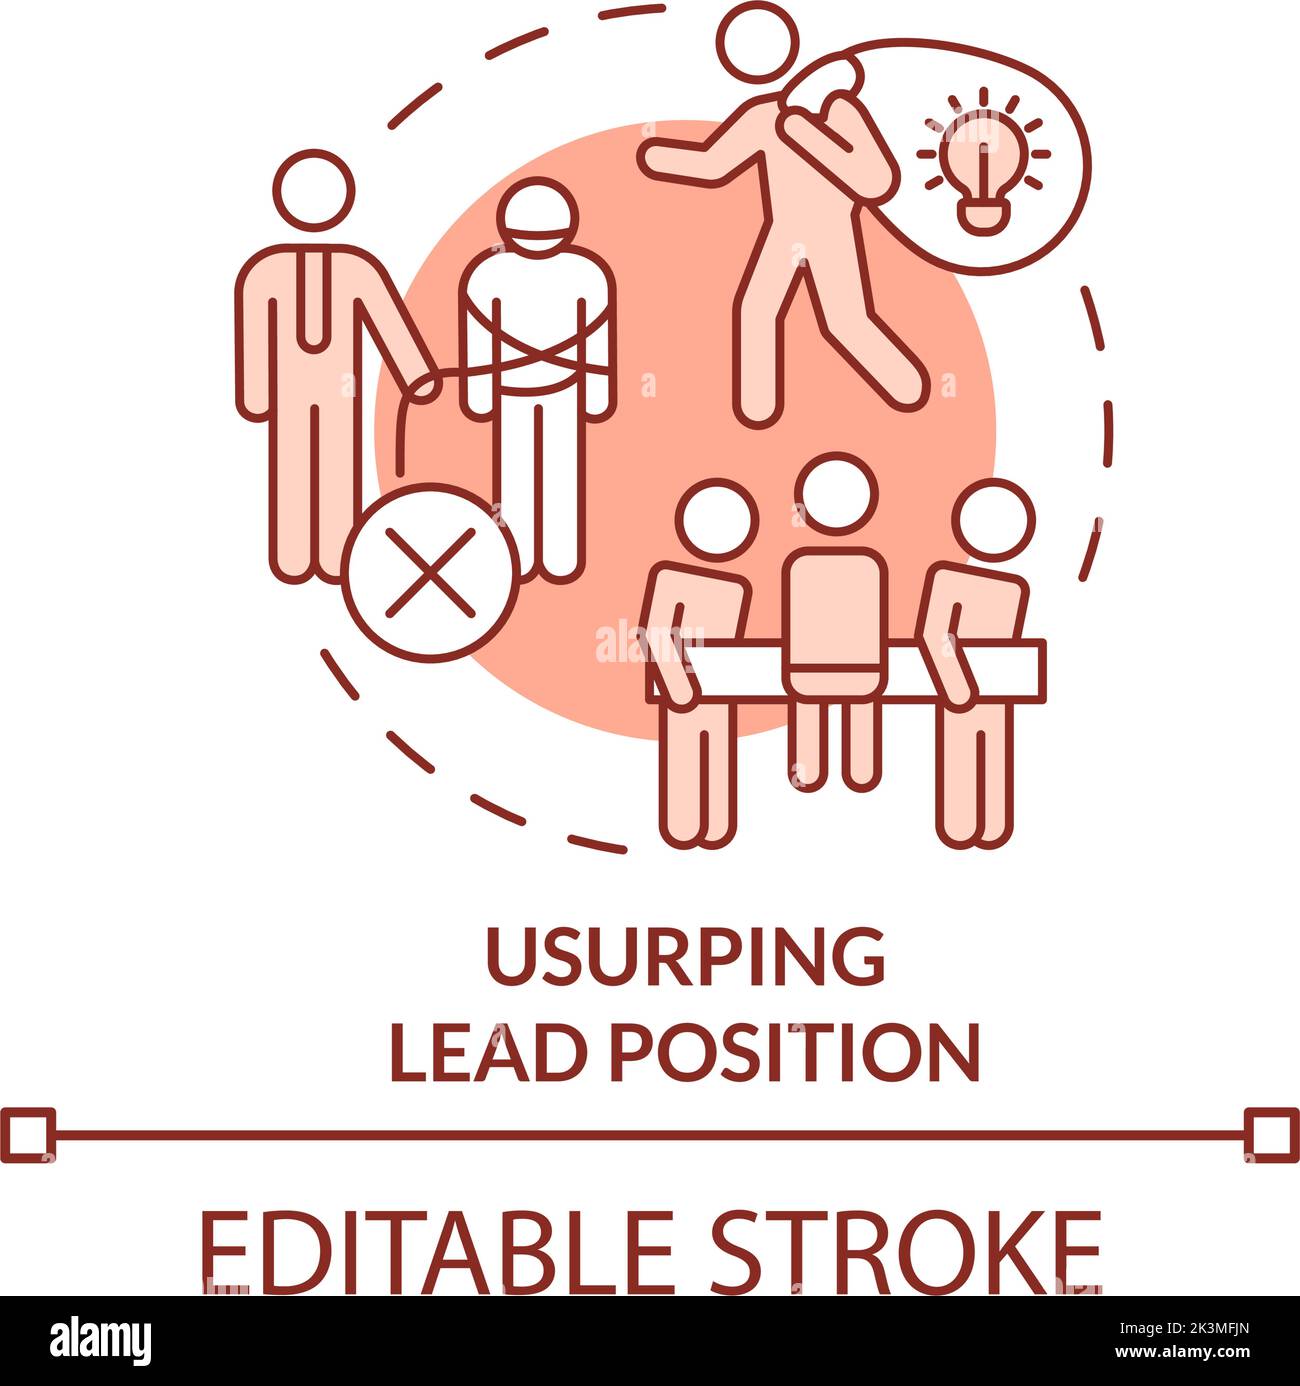 Usurping lead position terracotta concept icon Stock Vector